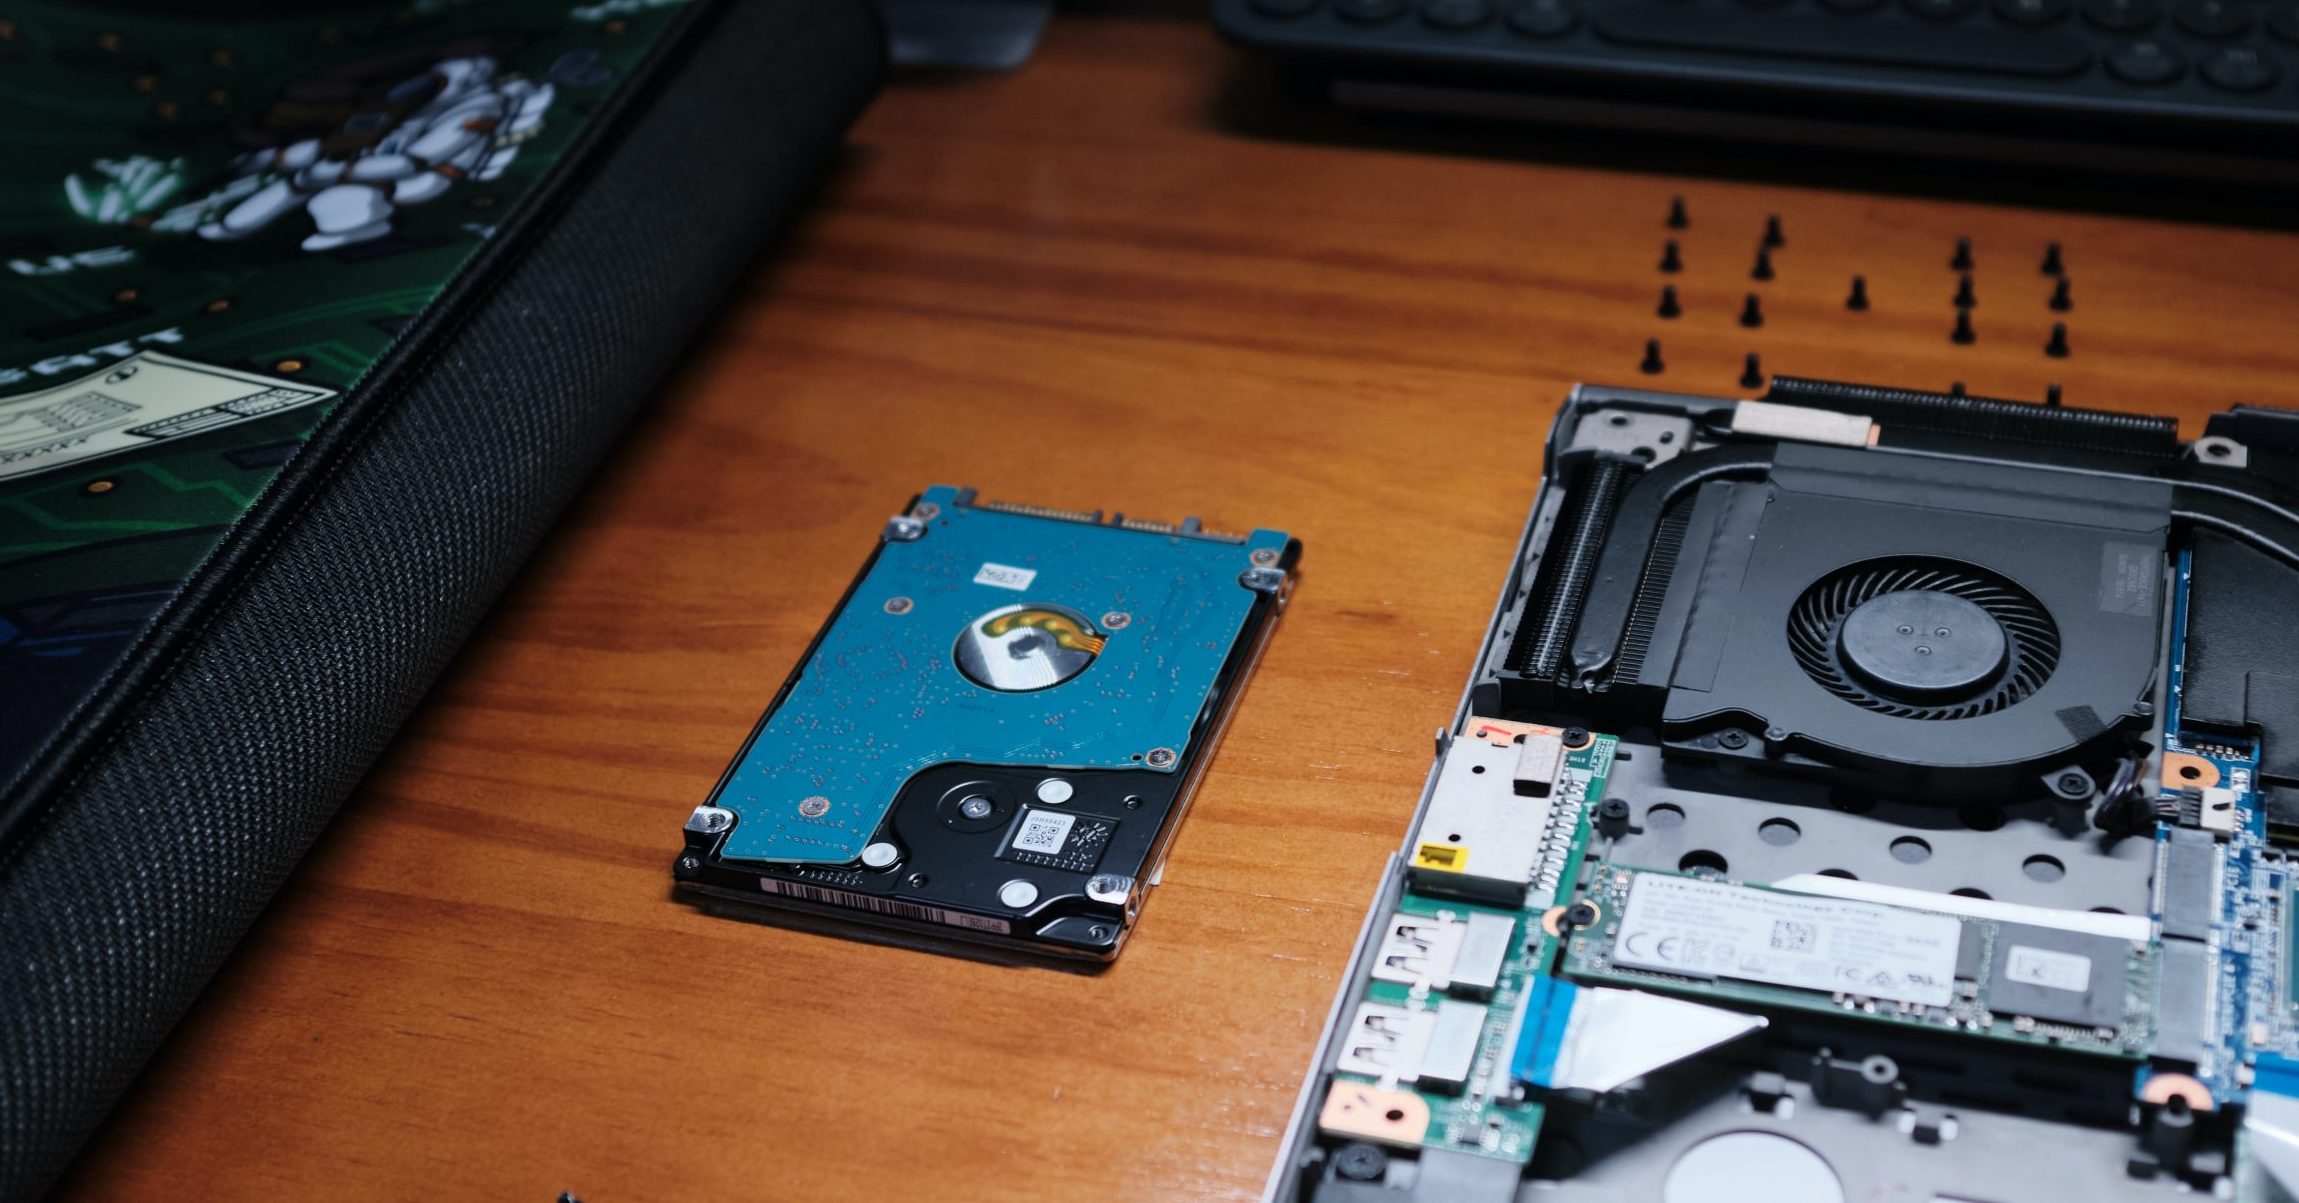 Press Release: DriveSavers Data Recovery Services Now Available for Helium Hard Disk Drives